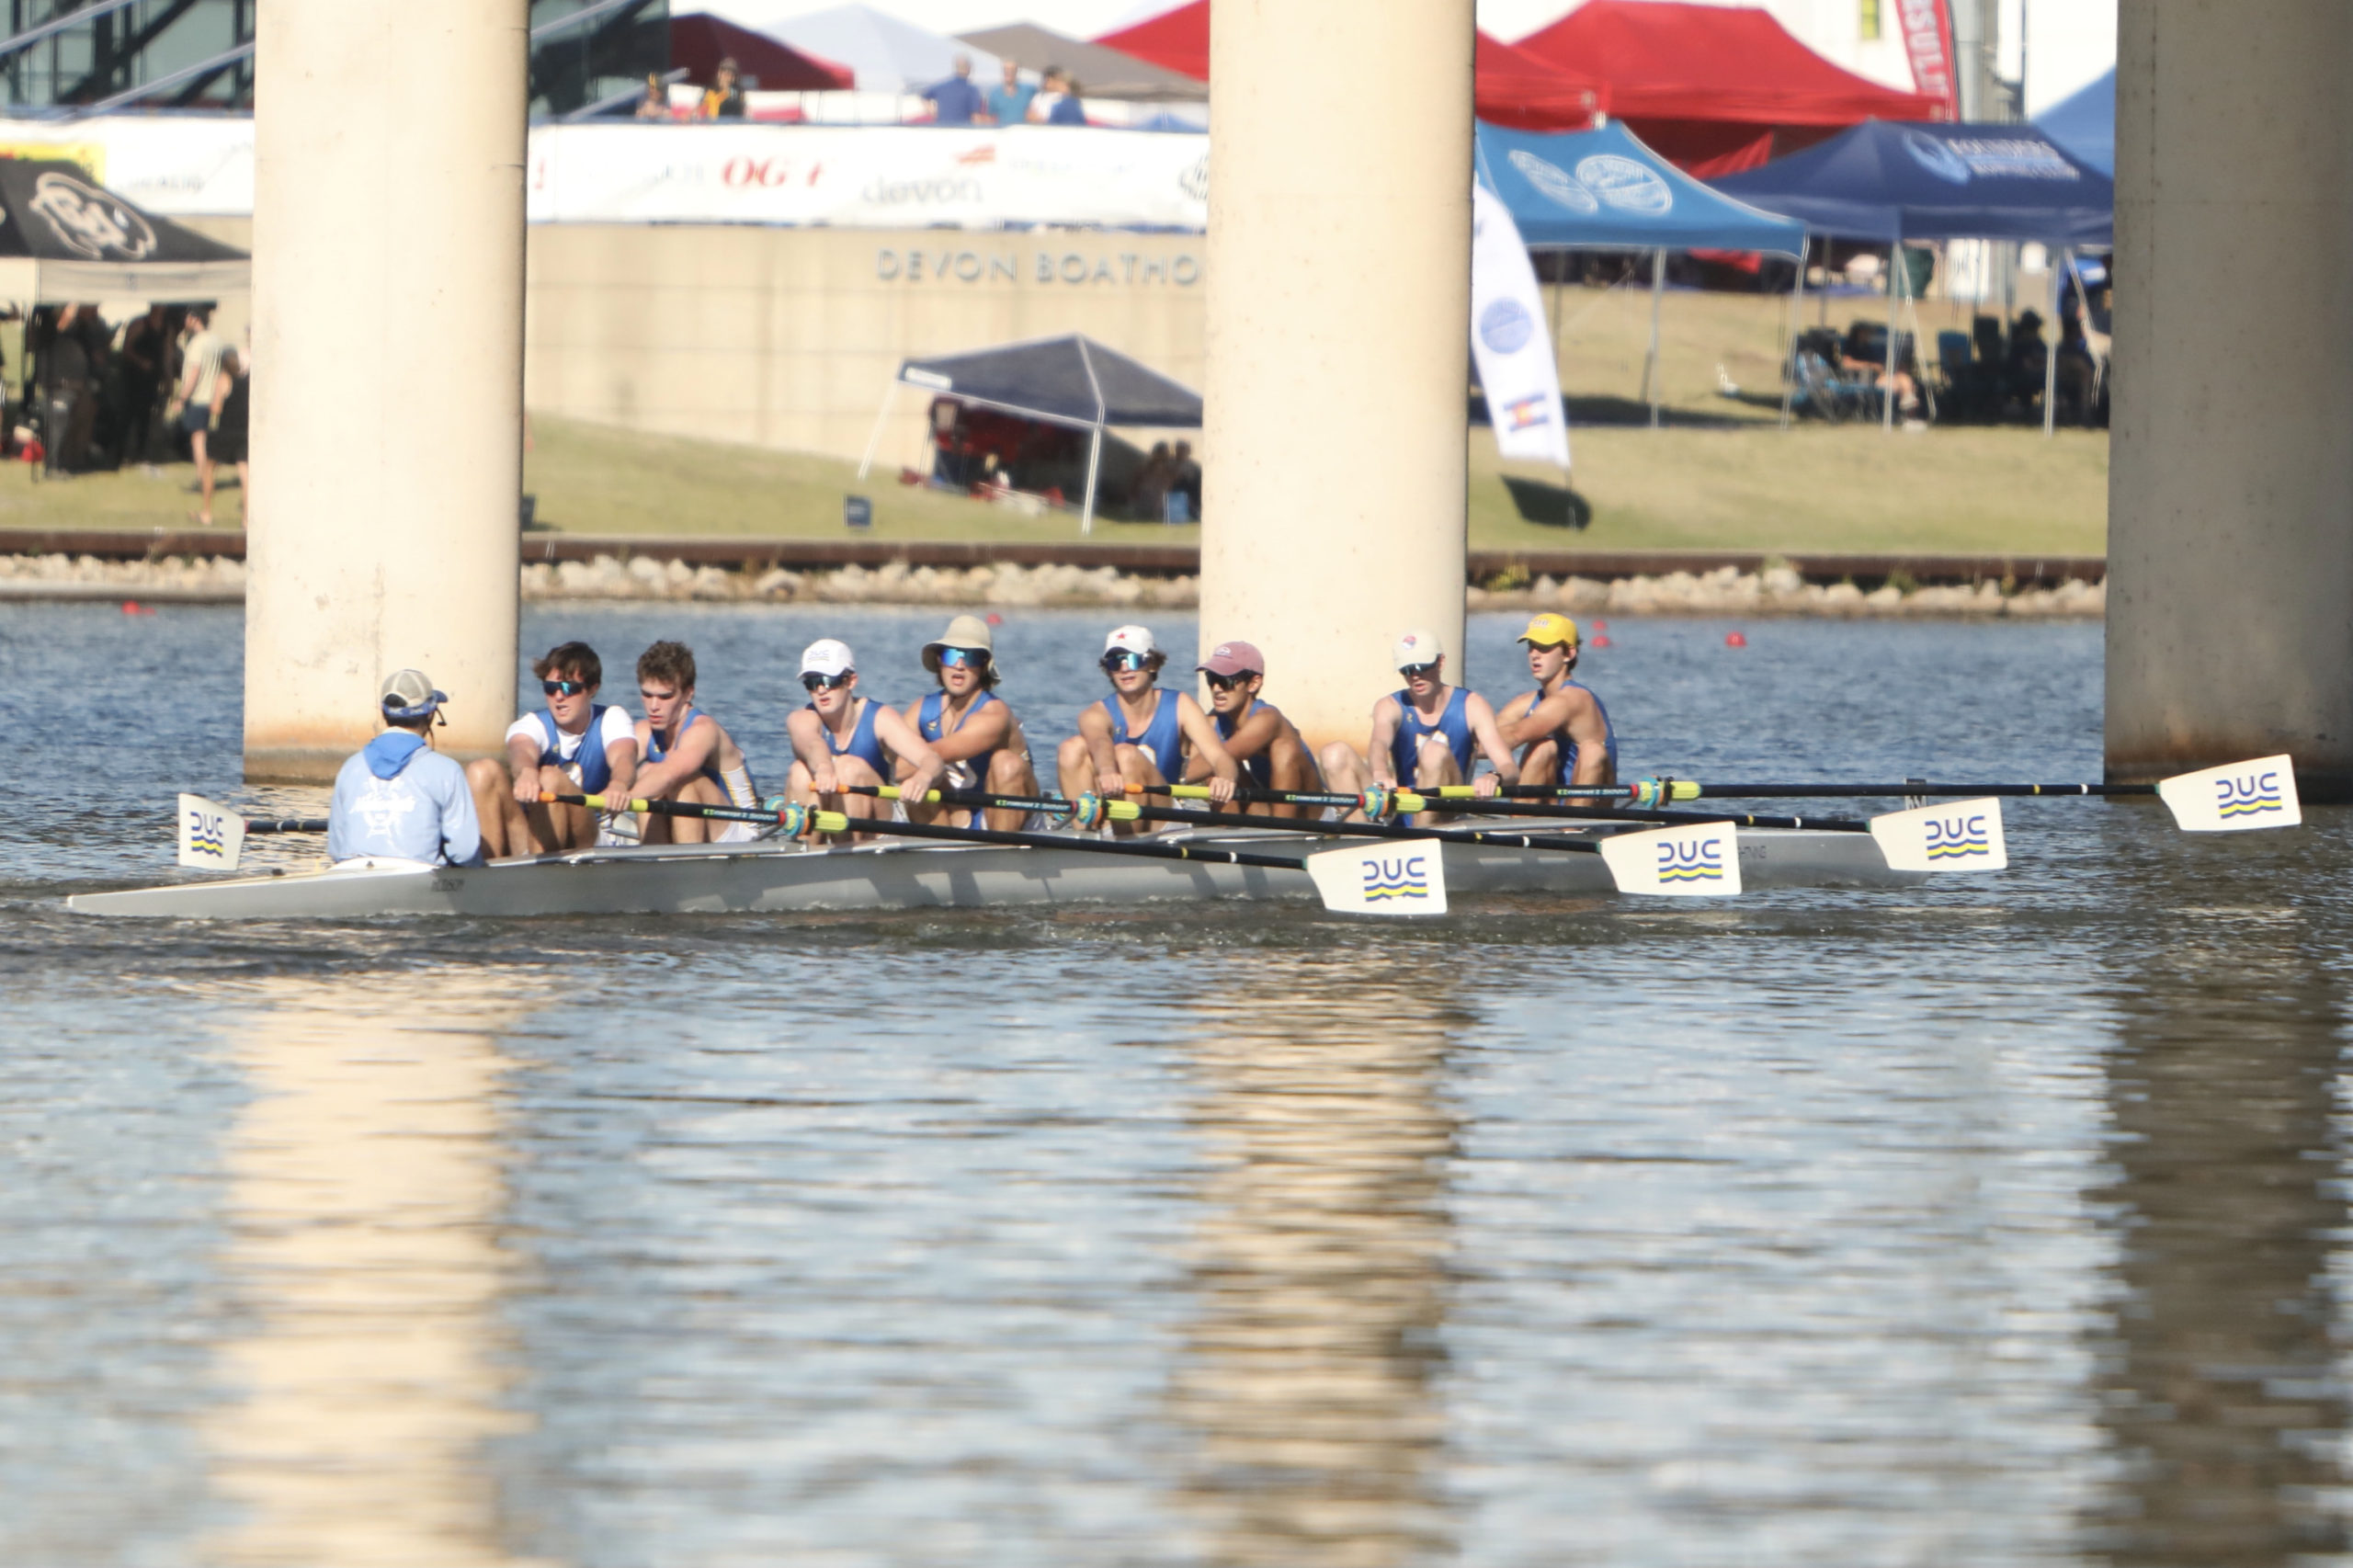 Dallas United Crew varsity boys rowing. There are eight of them, and the blades of their oars are in the air as they prepare to take a stroke.